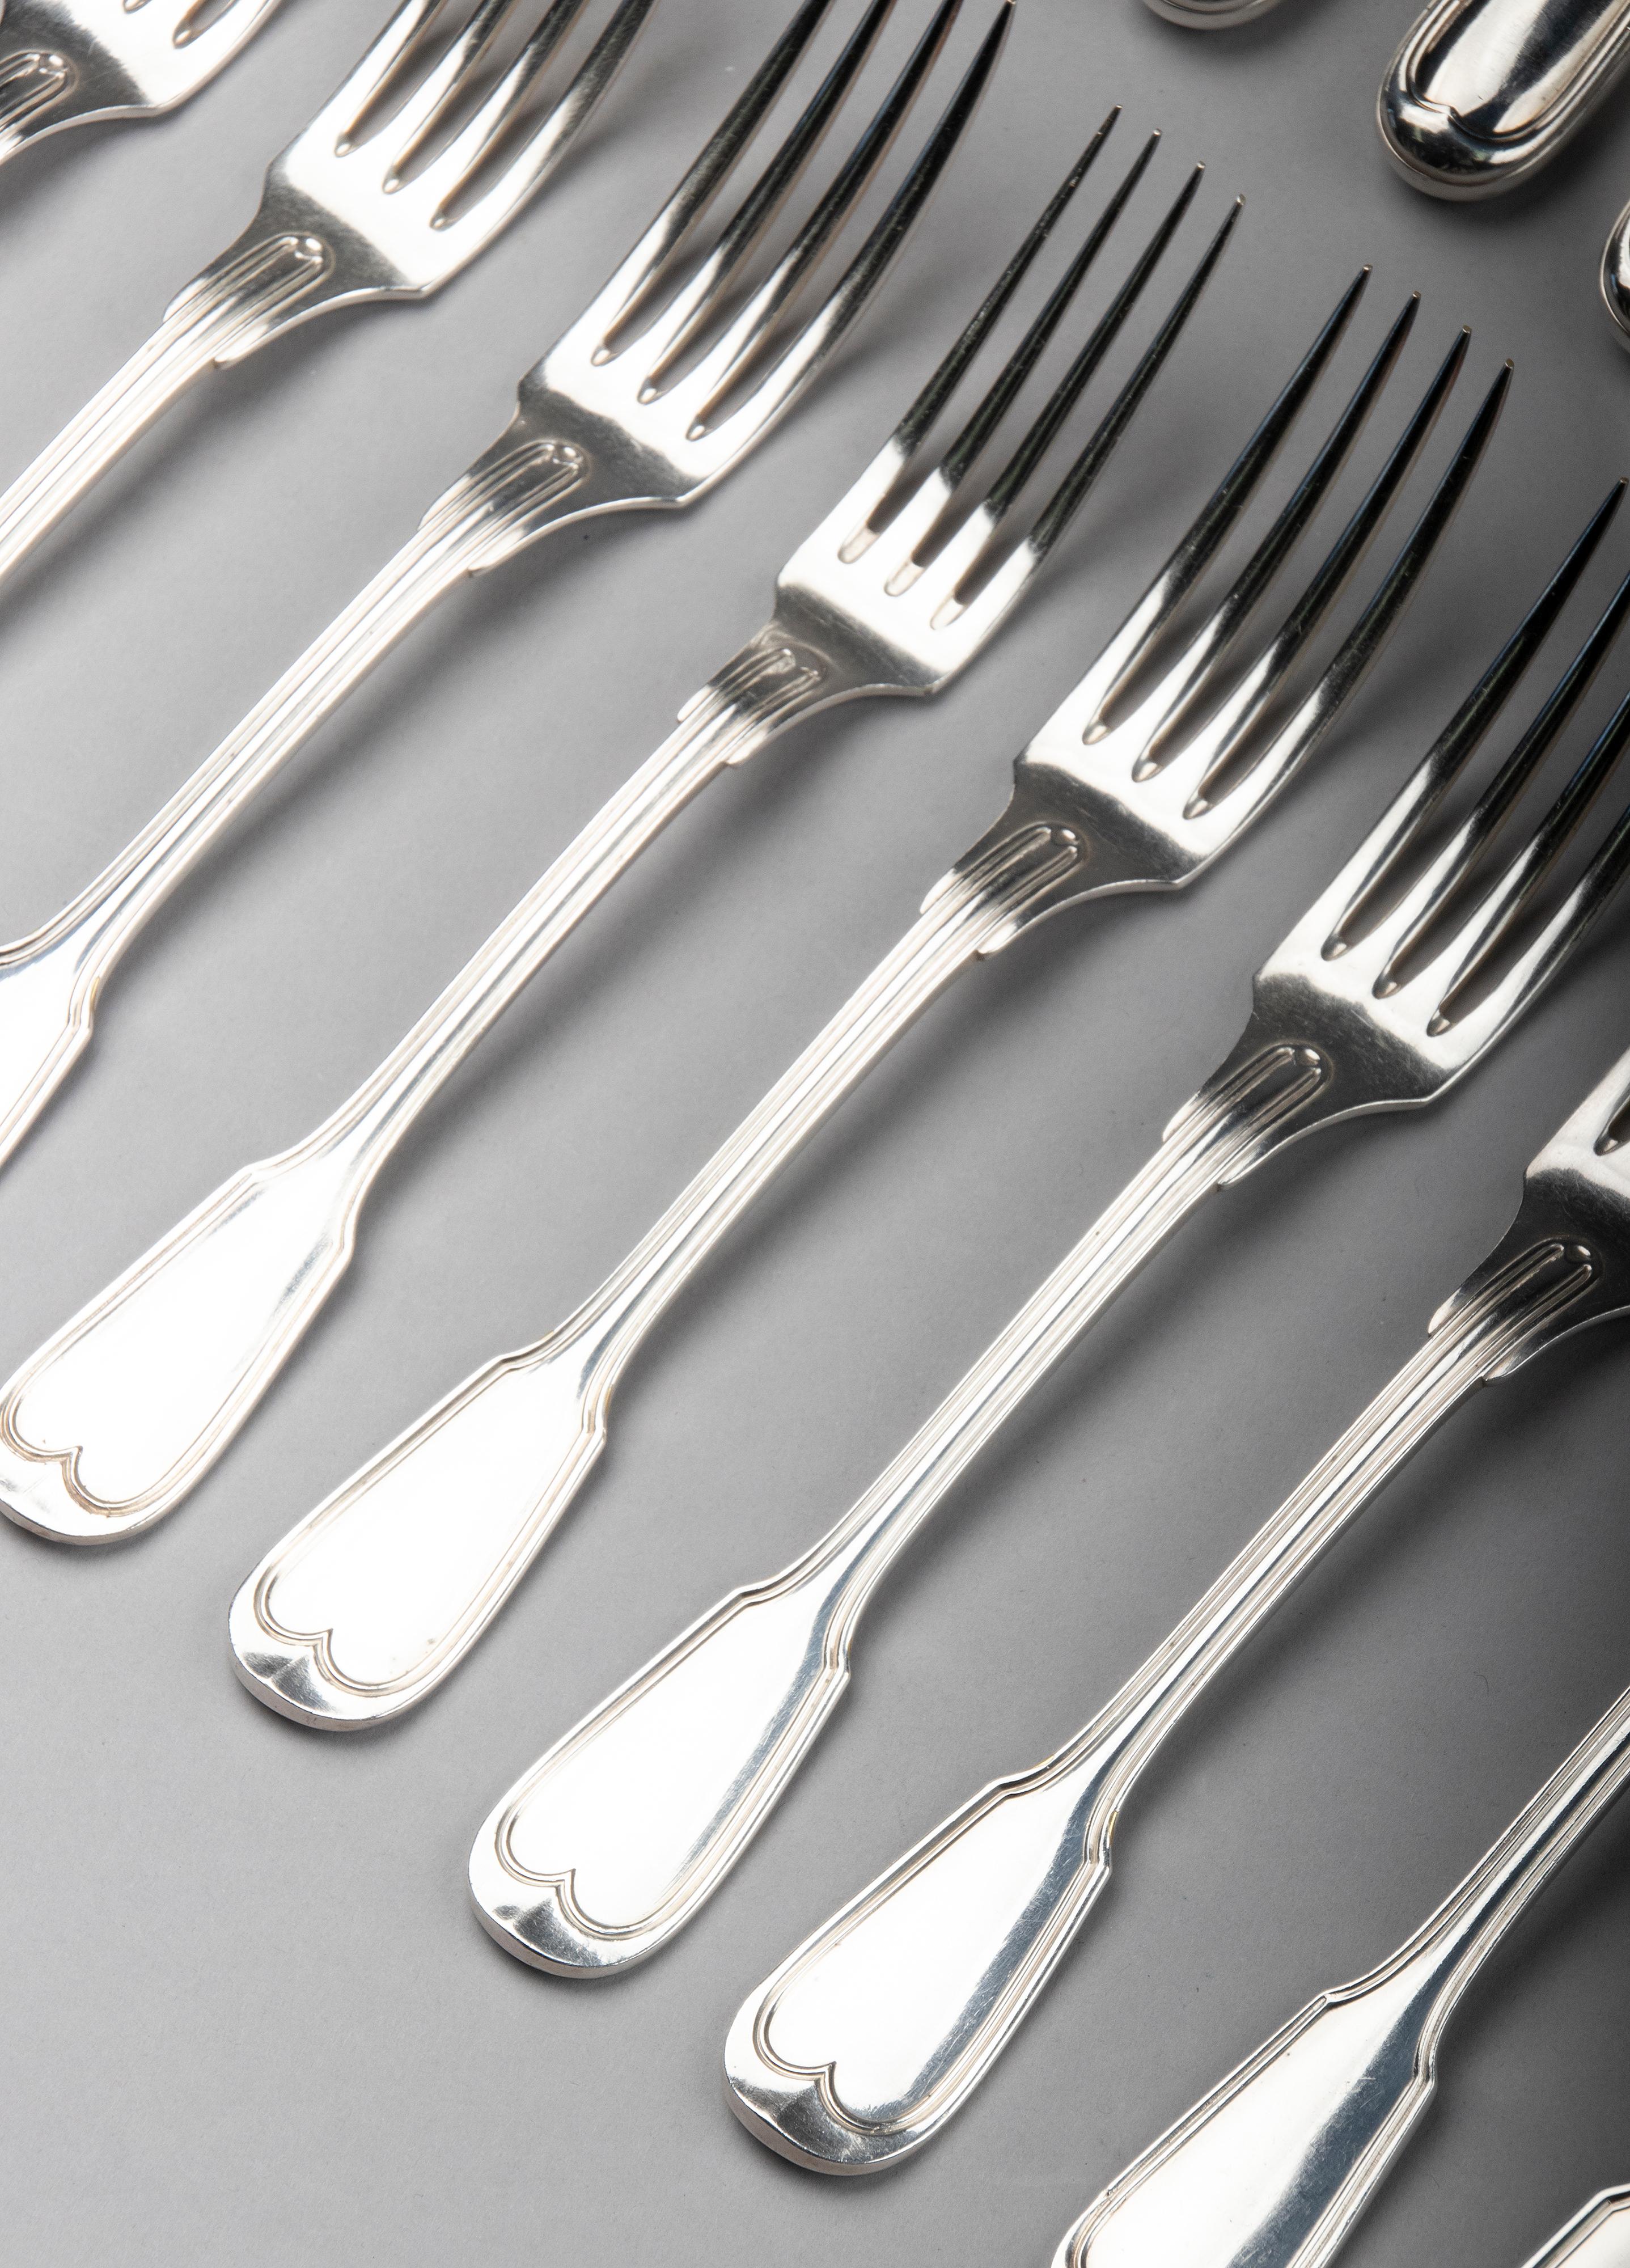 60-Piece Set of Silver Plated Flatware by Christofle Model Chinon 12